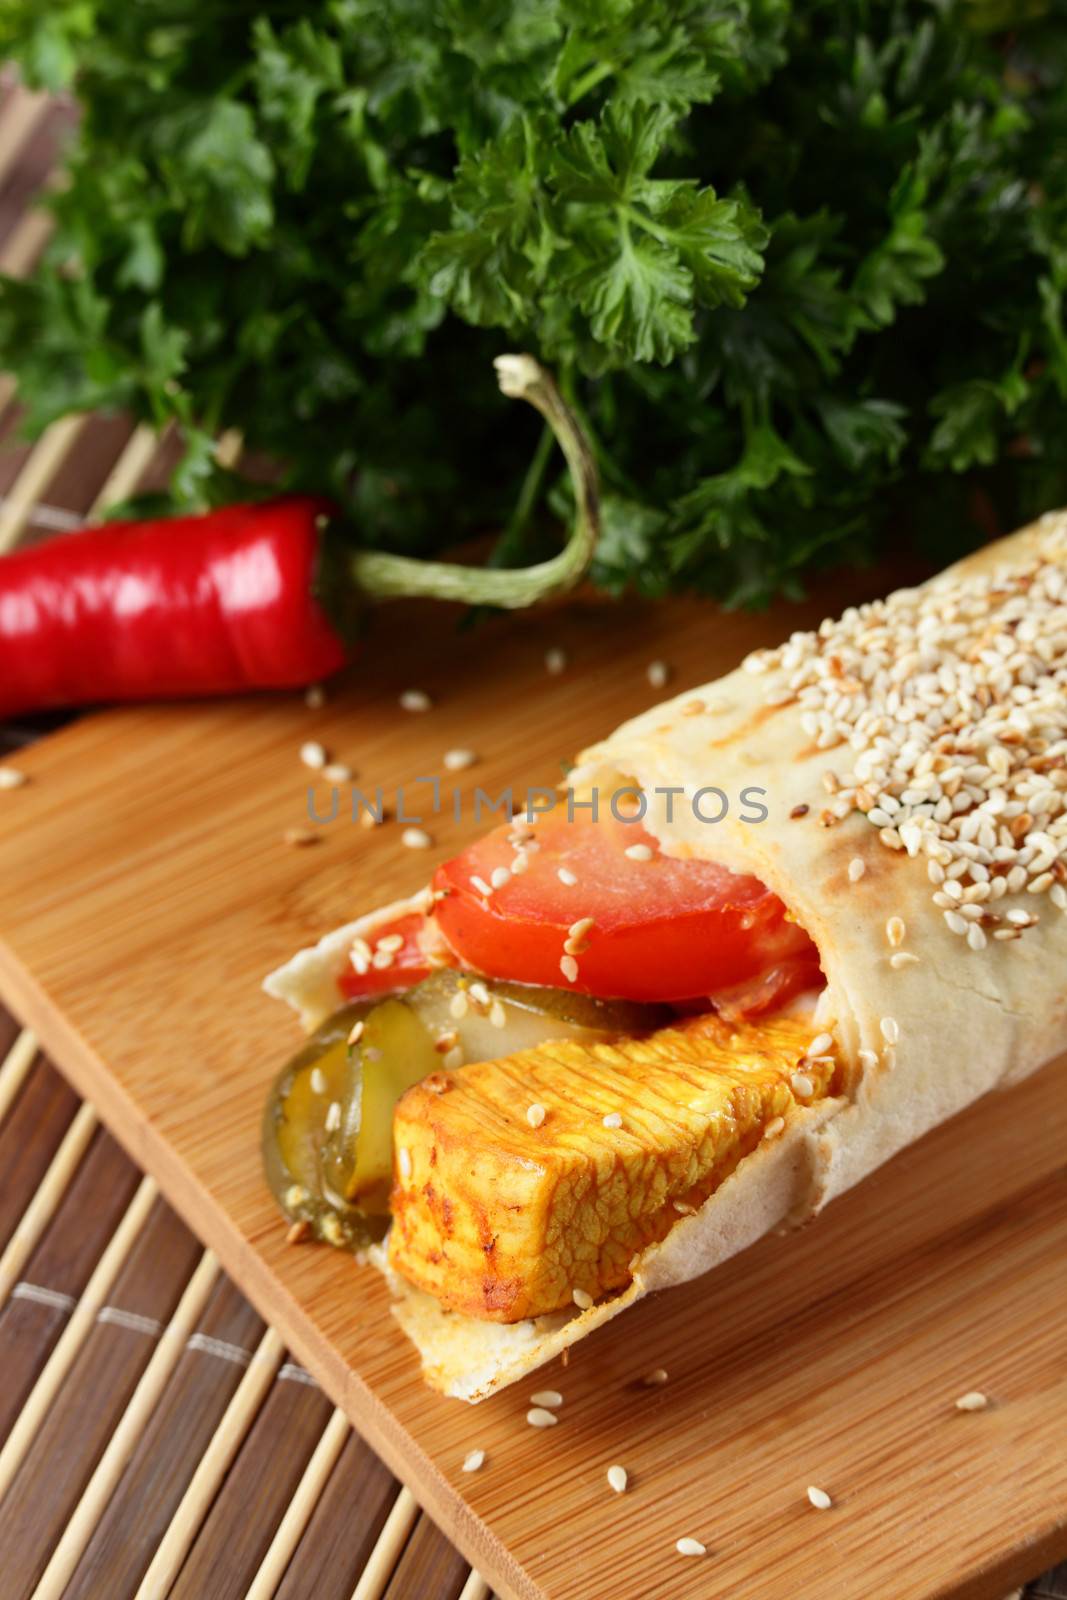 hot shawarma with vegetables by fiphoto